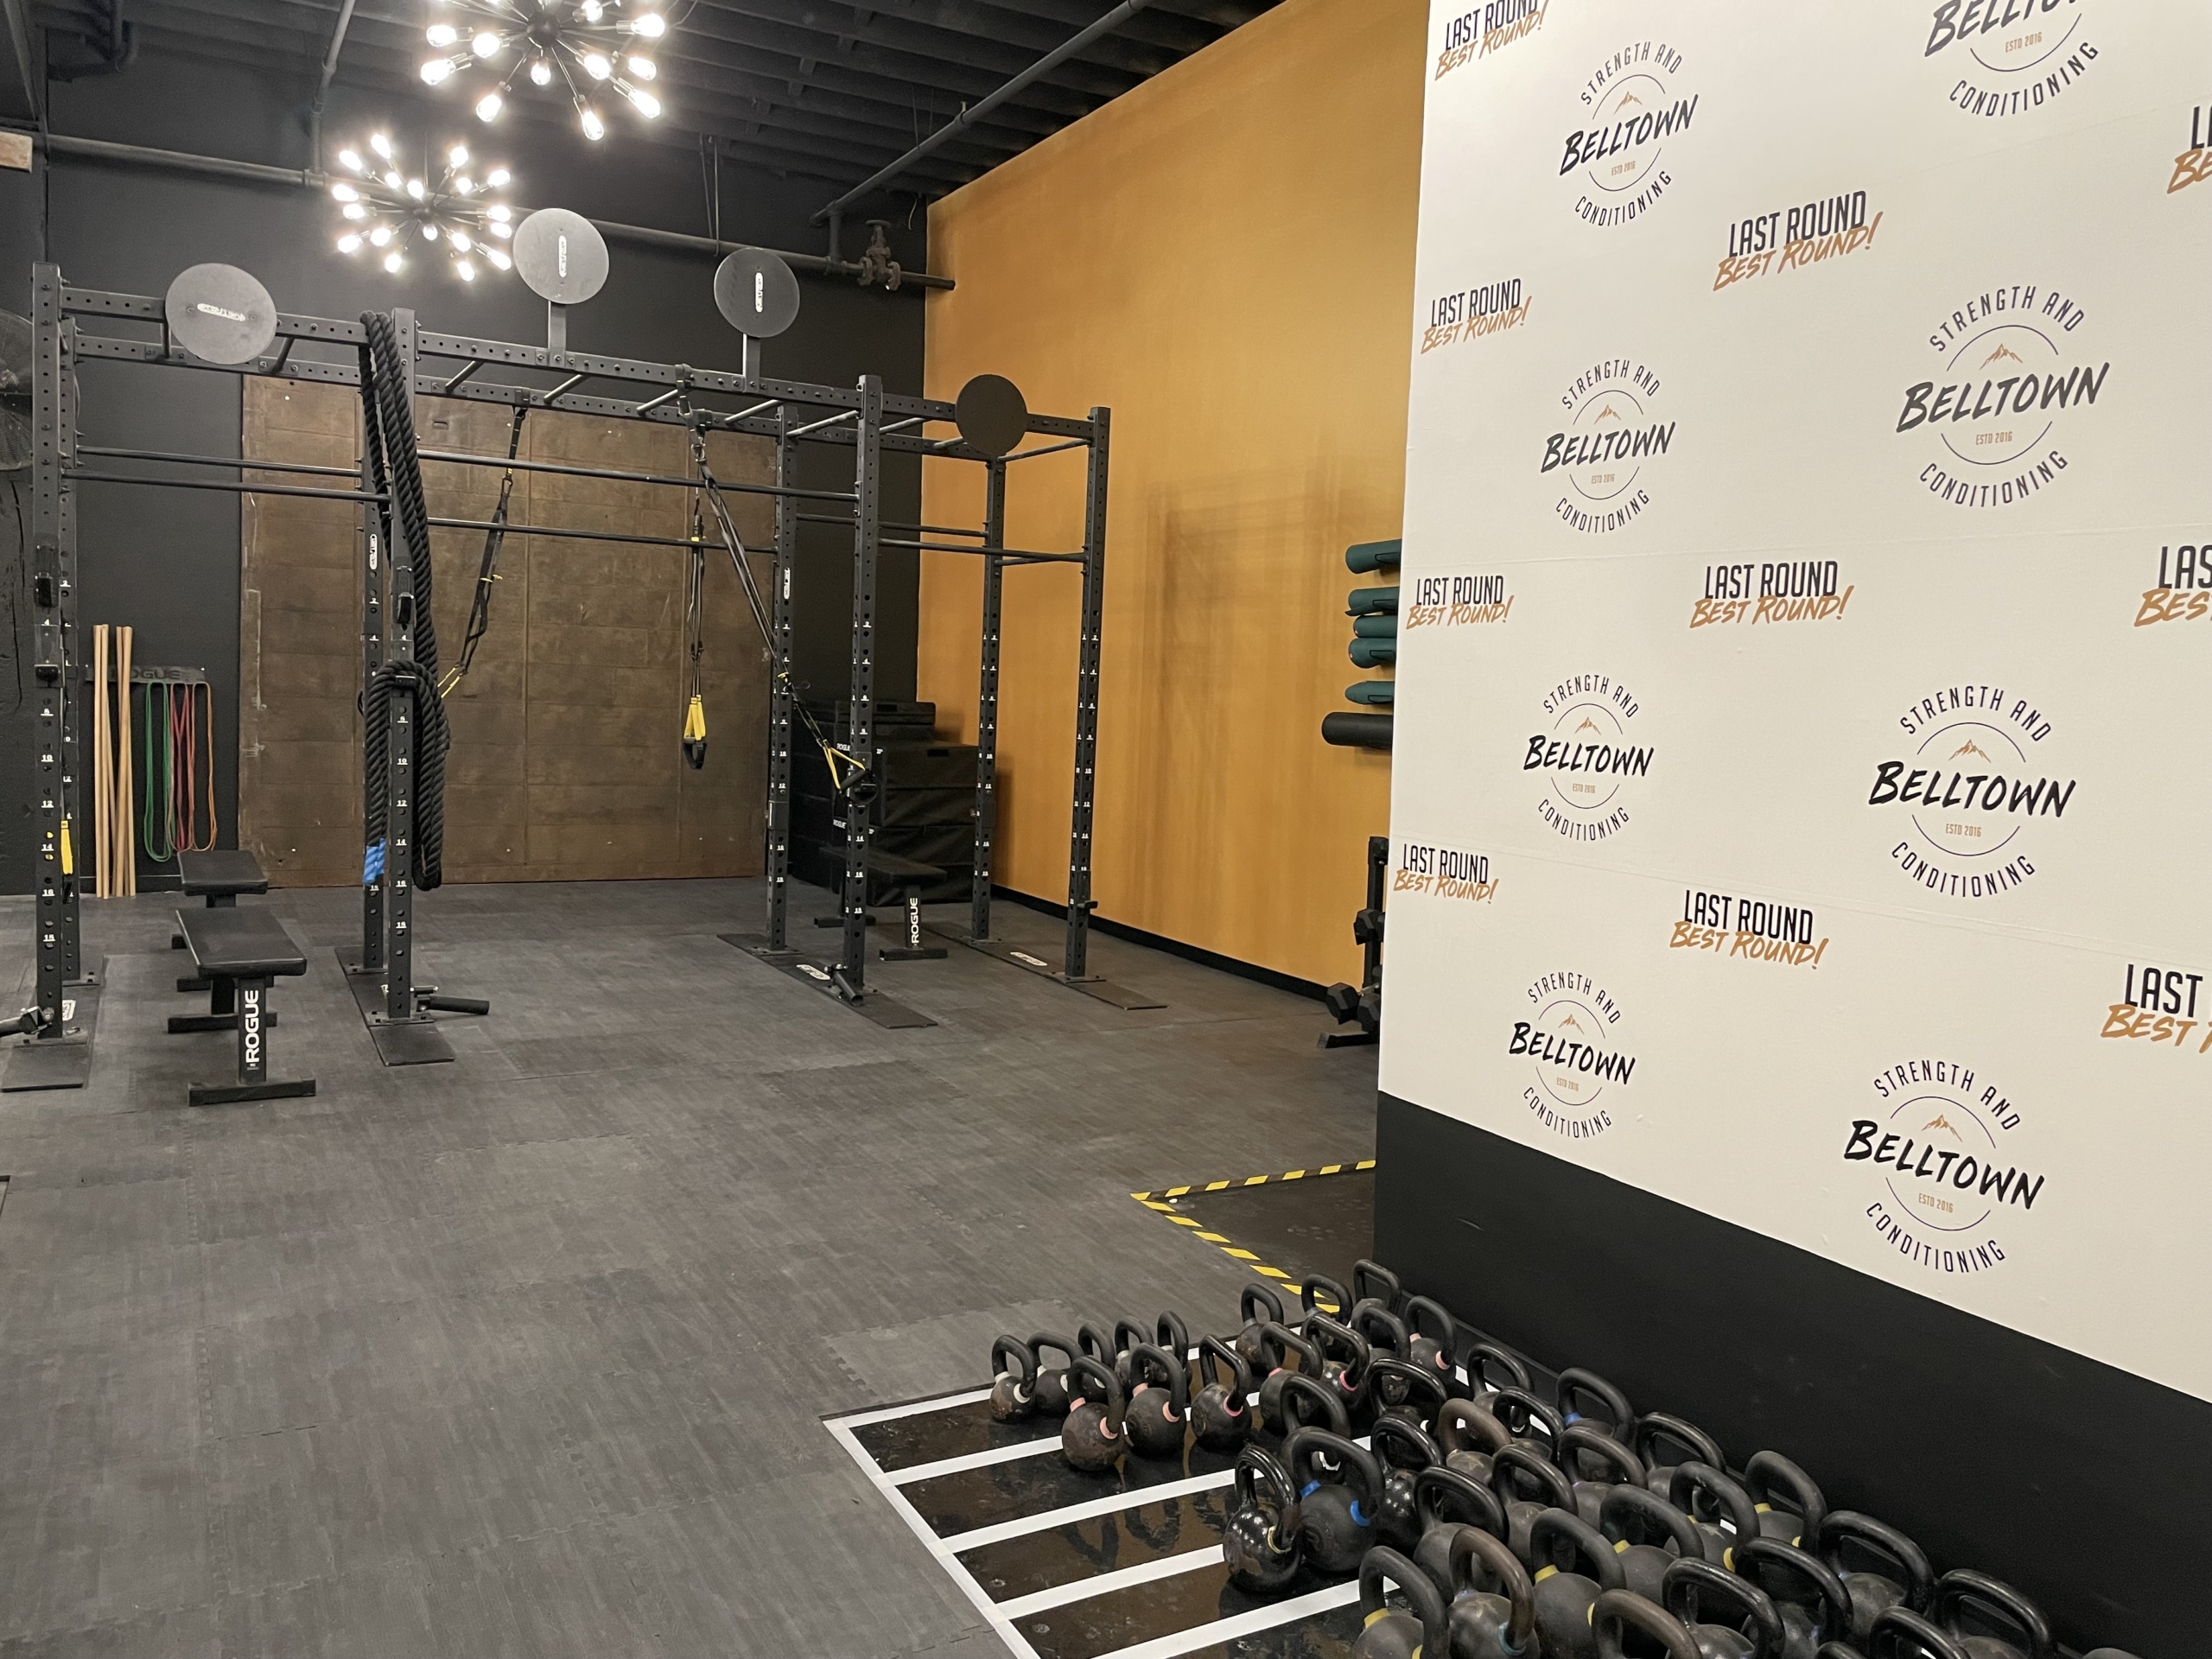 Belltown Strength and Conditioning